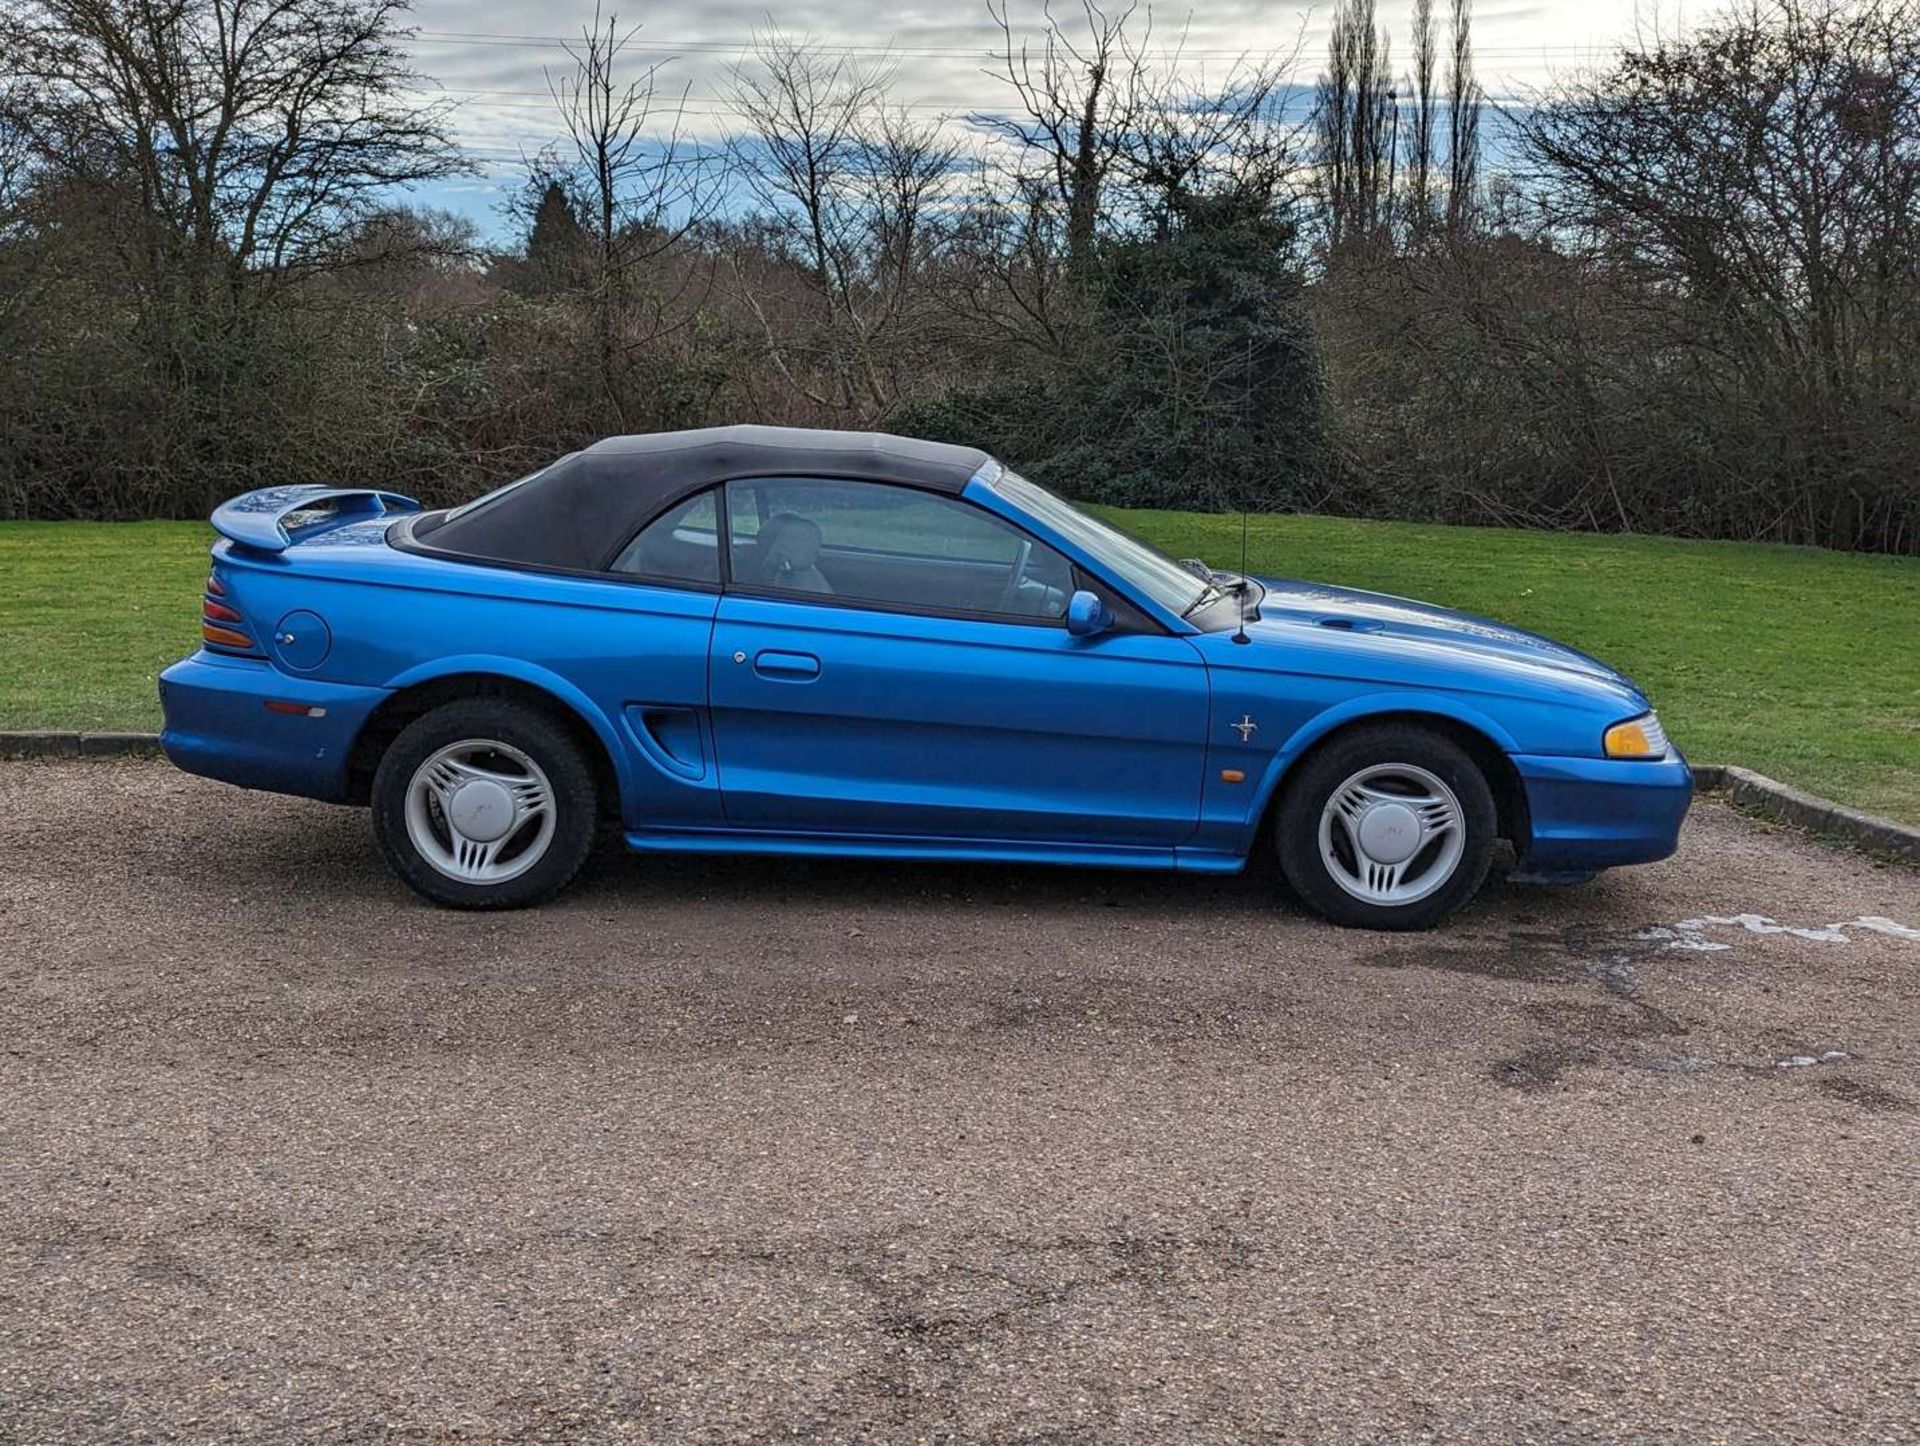 1994 FORD MUSTANG 3.8 CONVERTIBLE LHD - Image 9 of 29